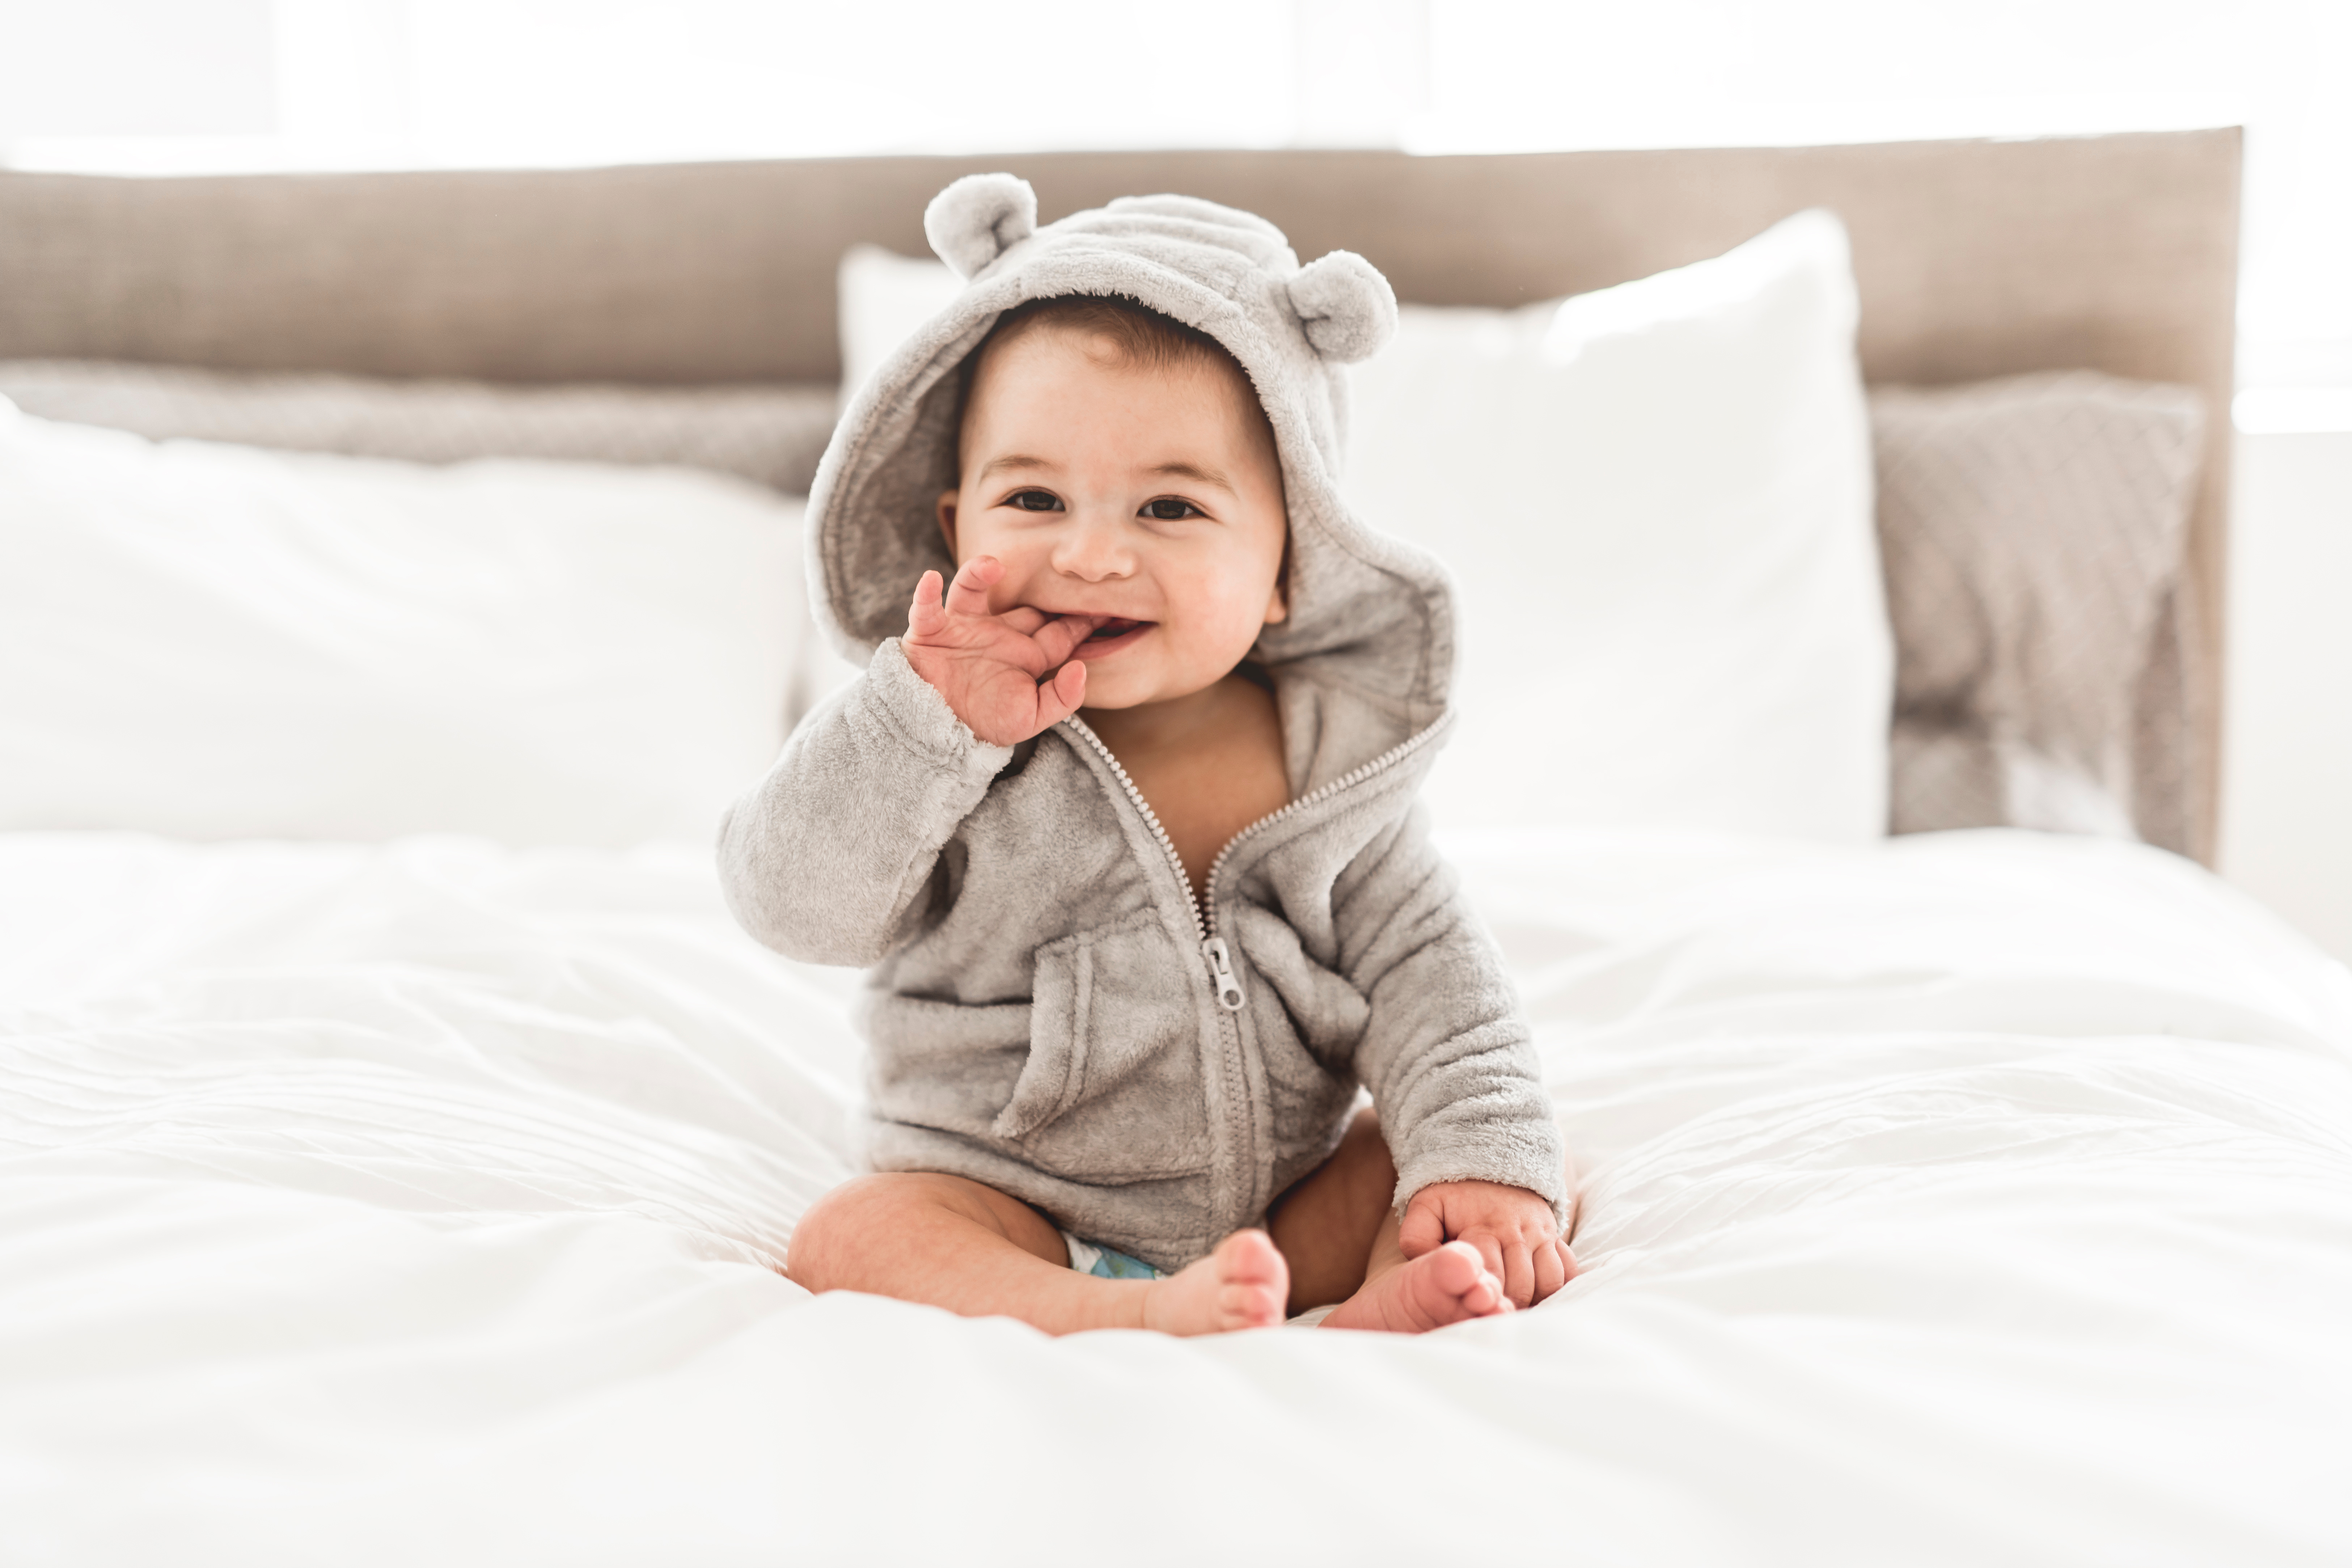 Baby sitting on the bed with a hooded bath towel with its fingers in its mouth